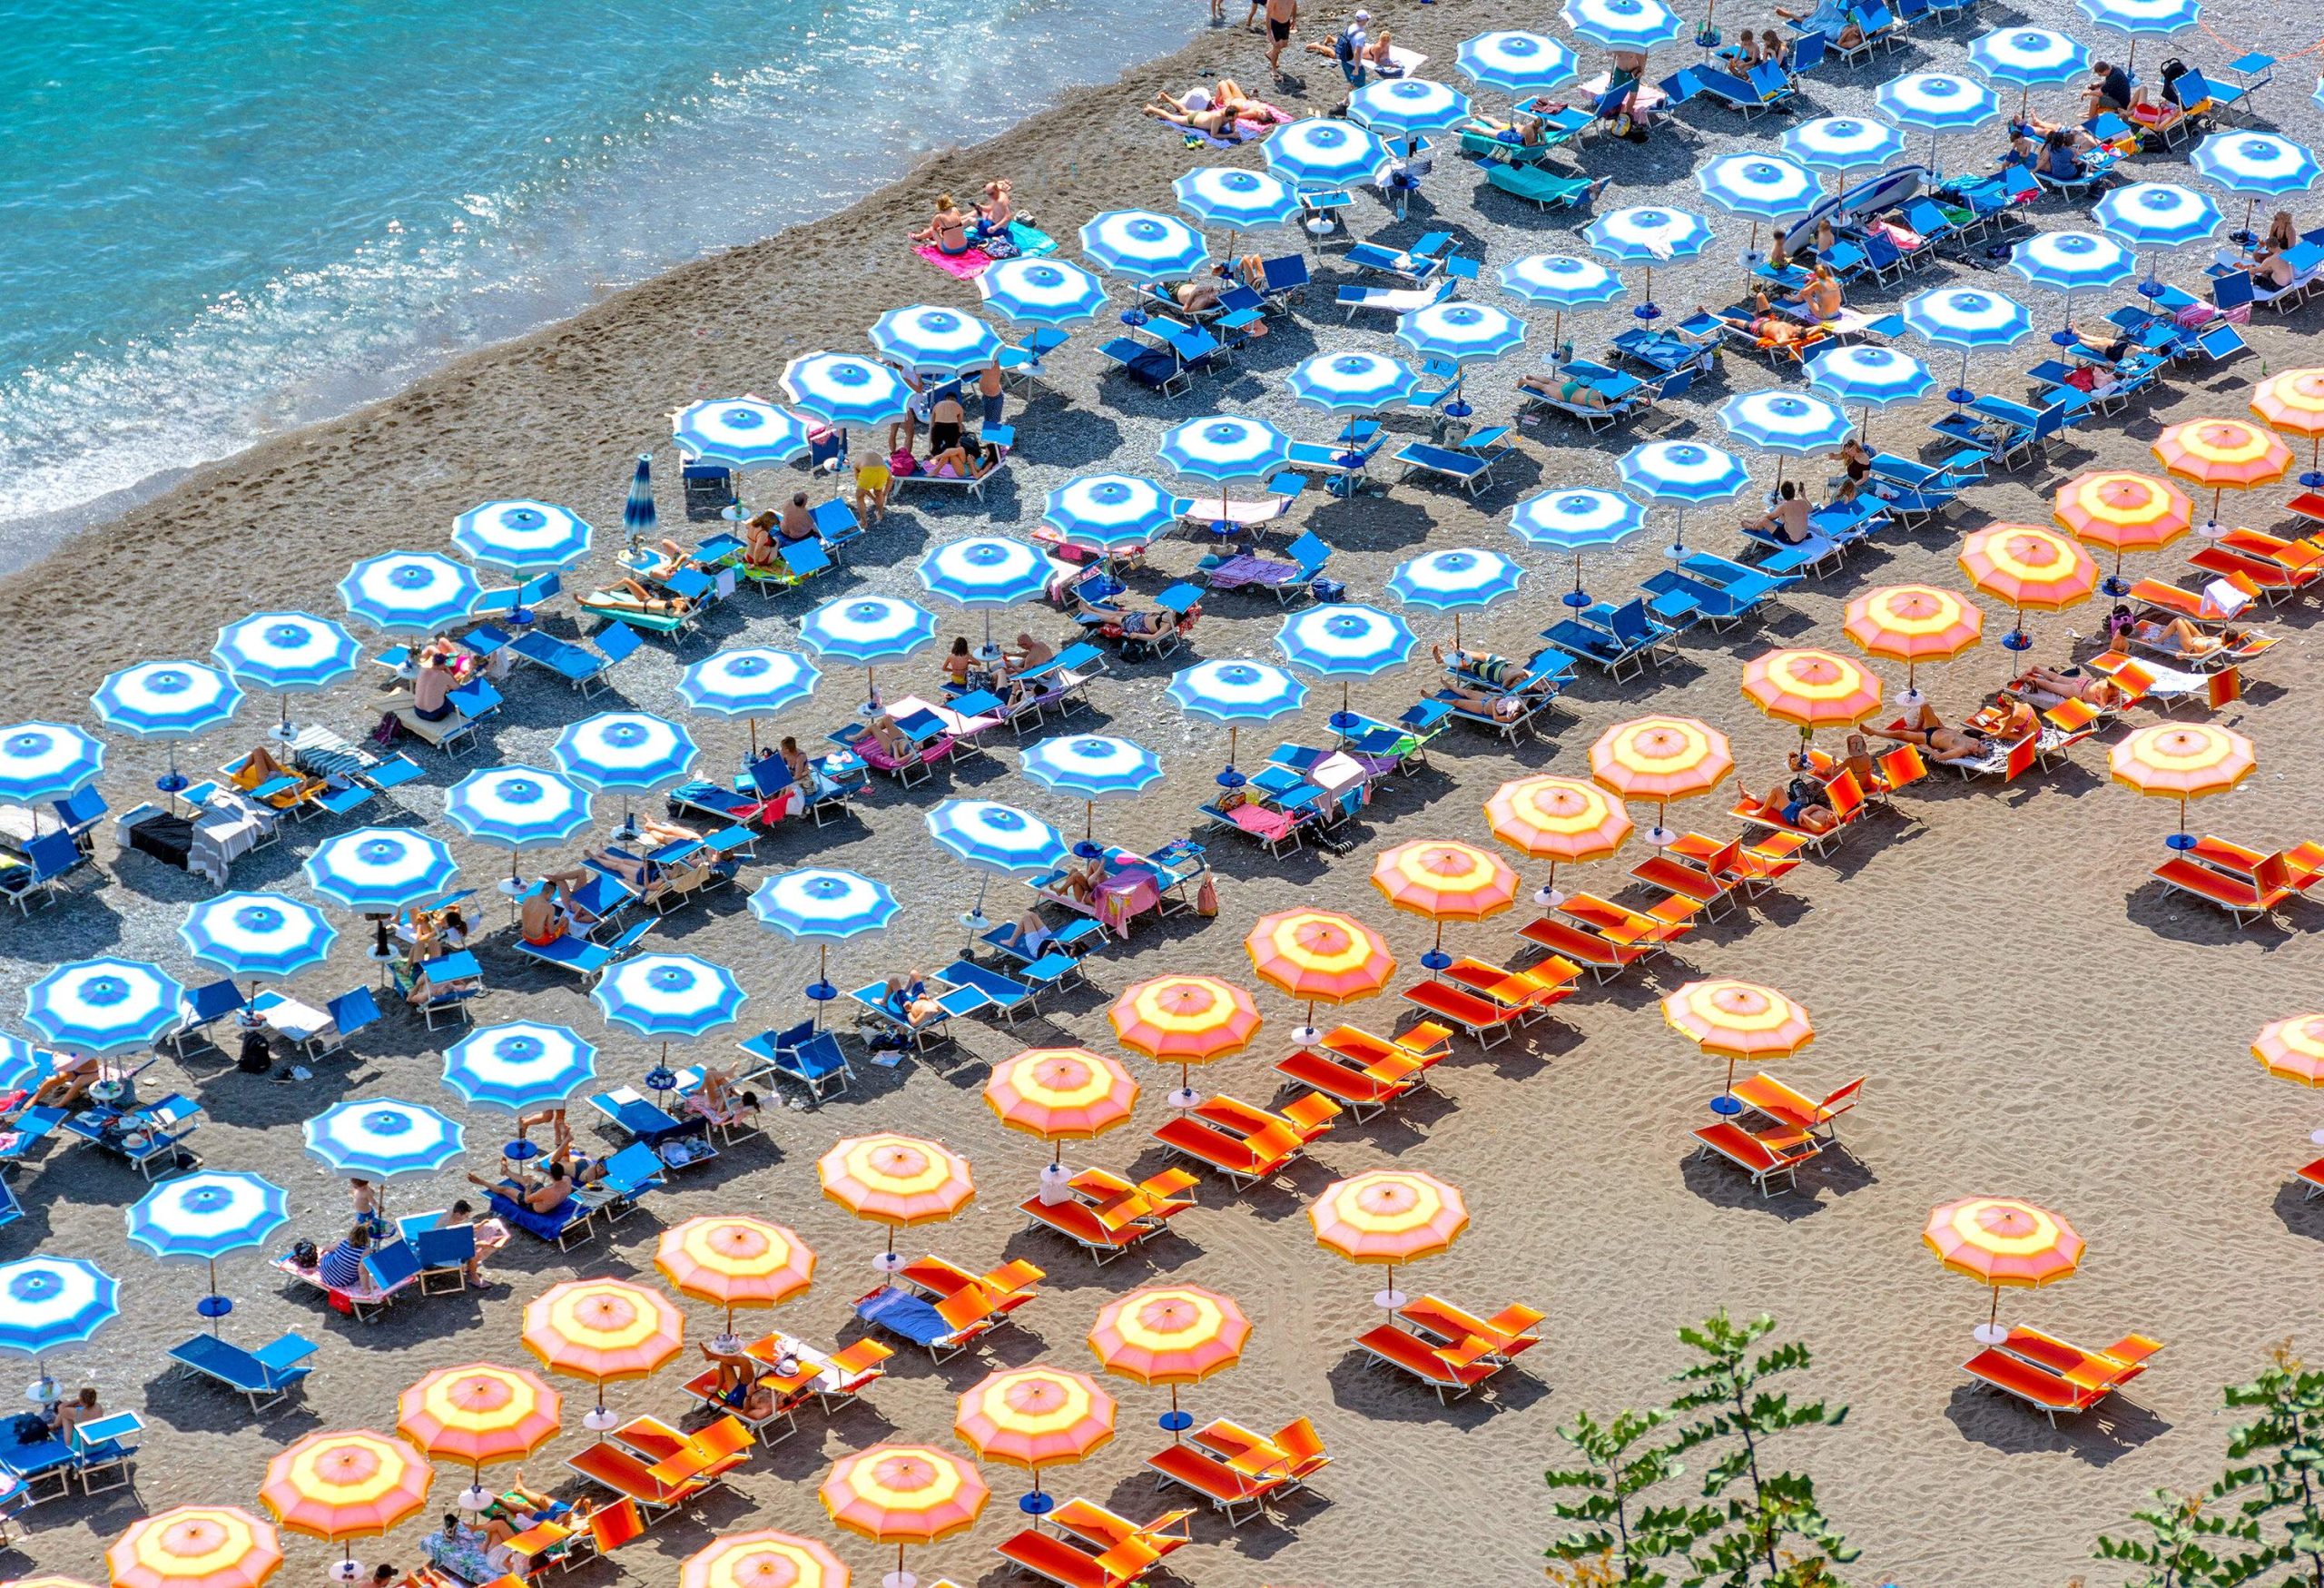 A sandy beach lined with umbrellas and loungers in blue and orange.